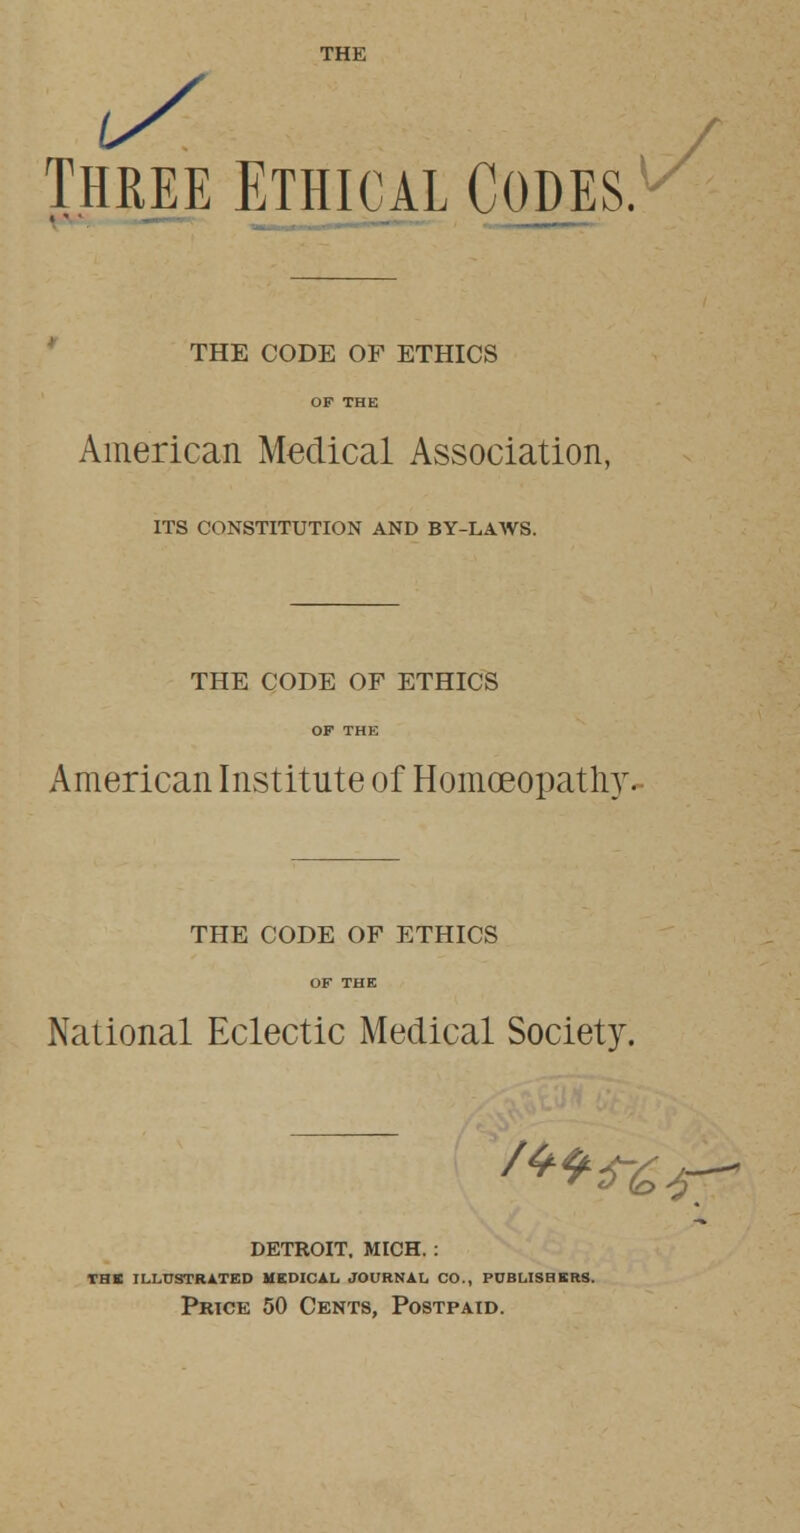 THE Three Ethical Codes.1 THE CODE OF ETHICS American Medical Association, ITS CONSTITUTION AND BY-LAWS. THE CODE OF ETHICS OF THE American Institute of Homoeopath)'. THE CODE OF ETHICS National Eclectic Medical Society. DETROIT, MICH.: THE ILLUSTRATED MEDICAL JOURNAL CO., PUBLISHERS. Price 50 Cents, Postpaid.